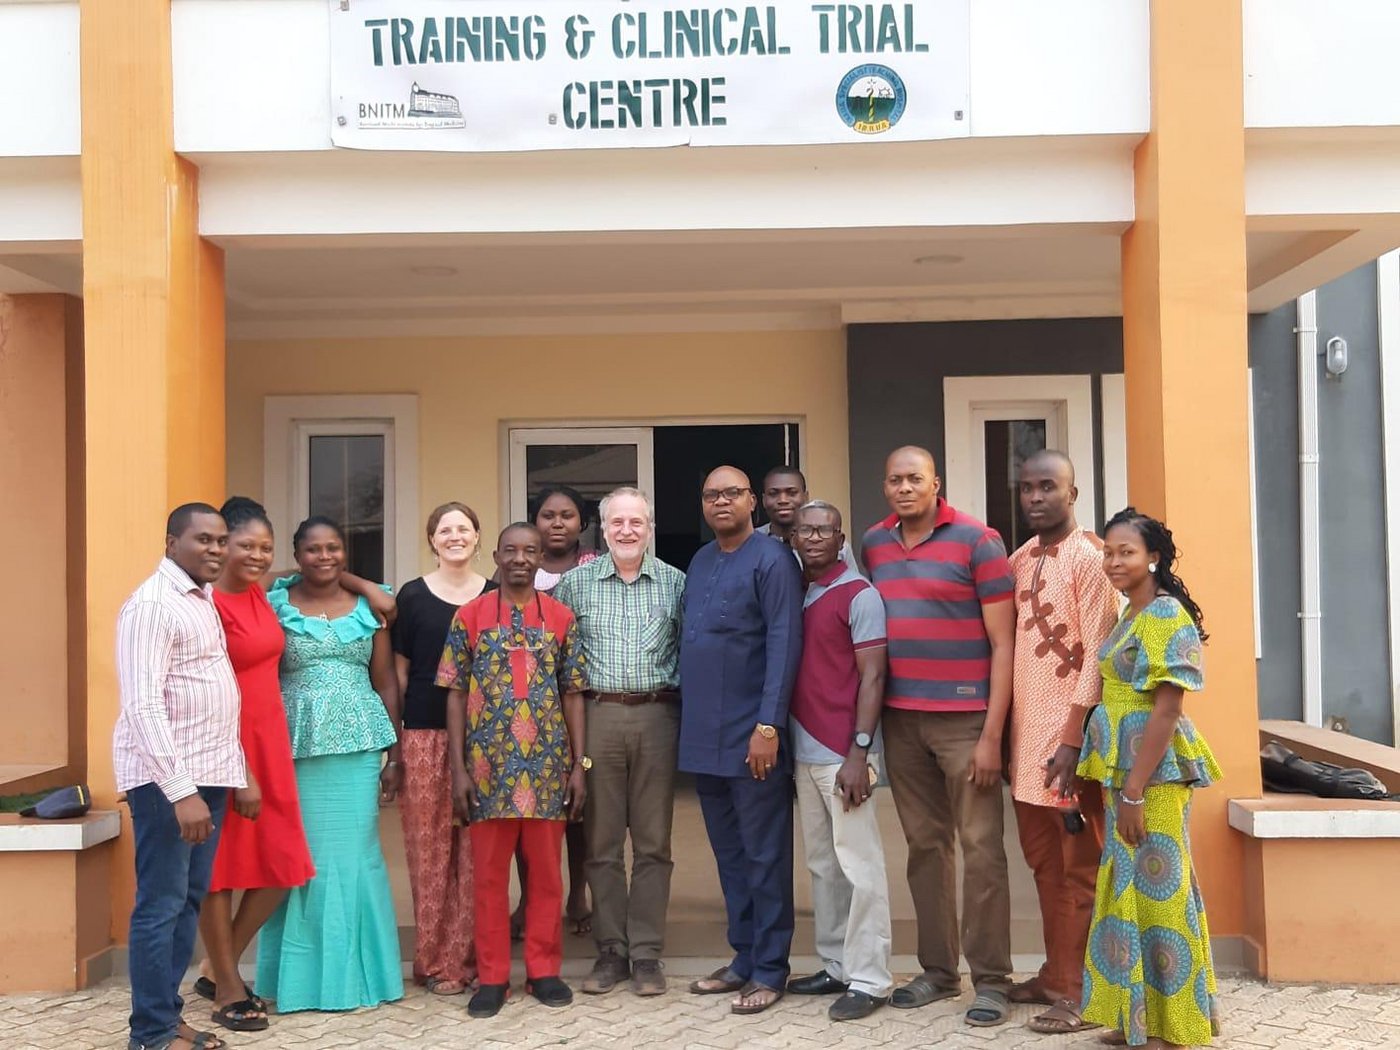 The ISTH and BNITM research team in Irrua/ Nigeria